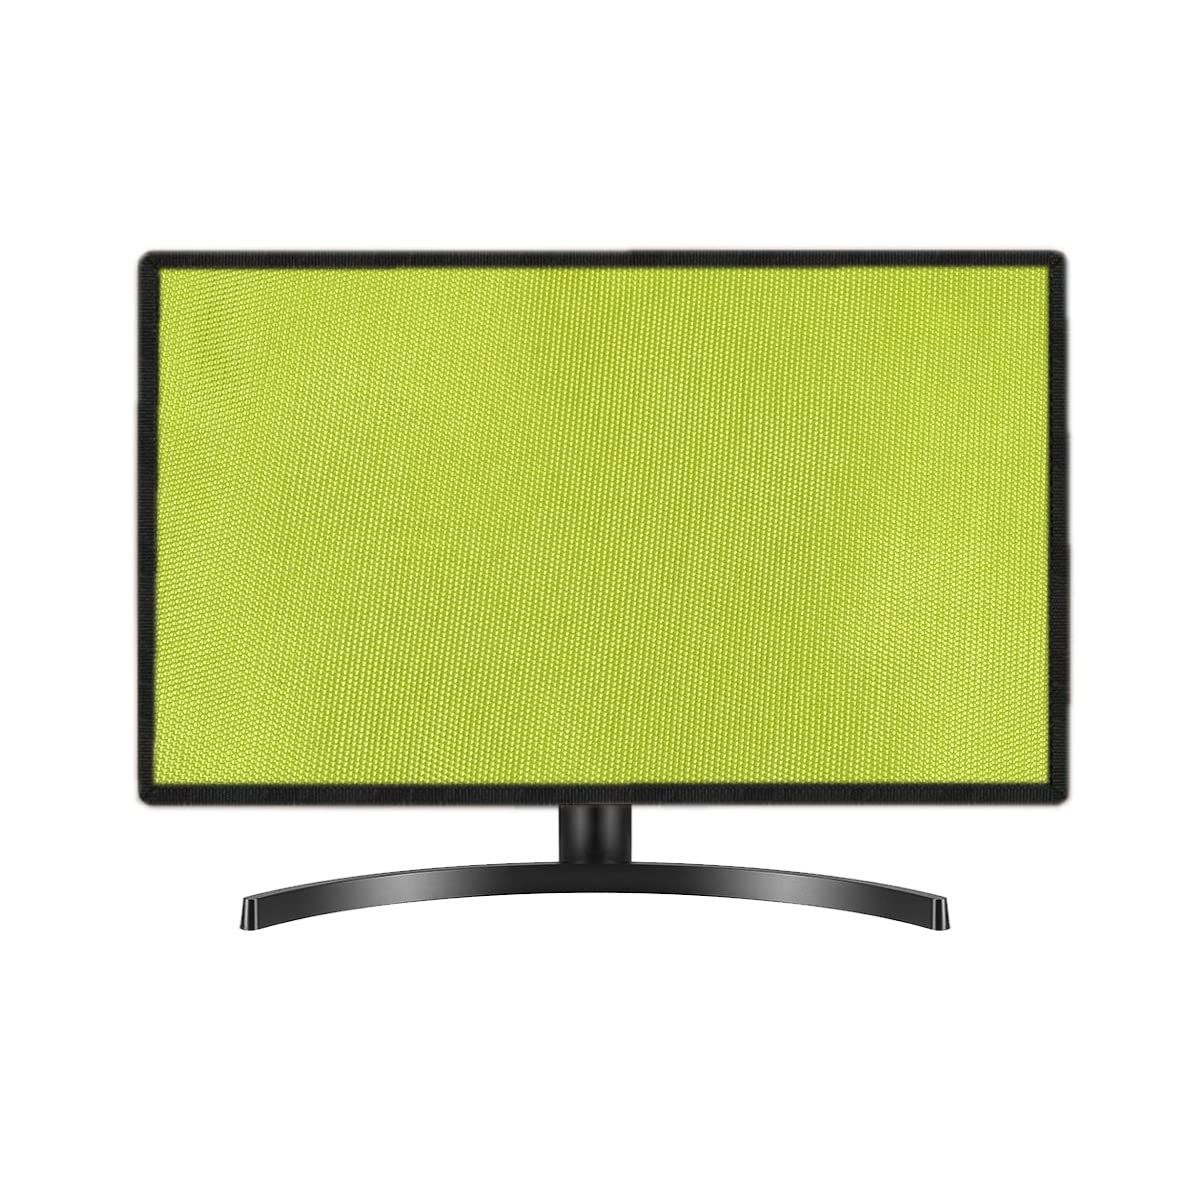 PalaP Super Premium Dust Proof Monitor Cover for ACER 19.5 inches Monitor (Green)